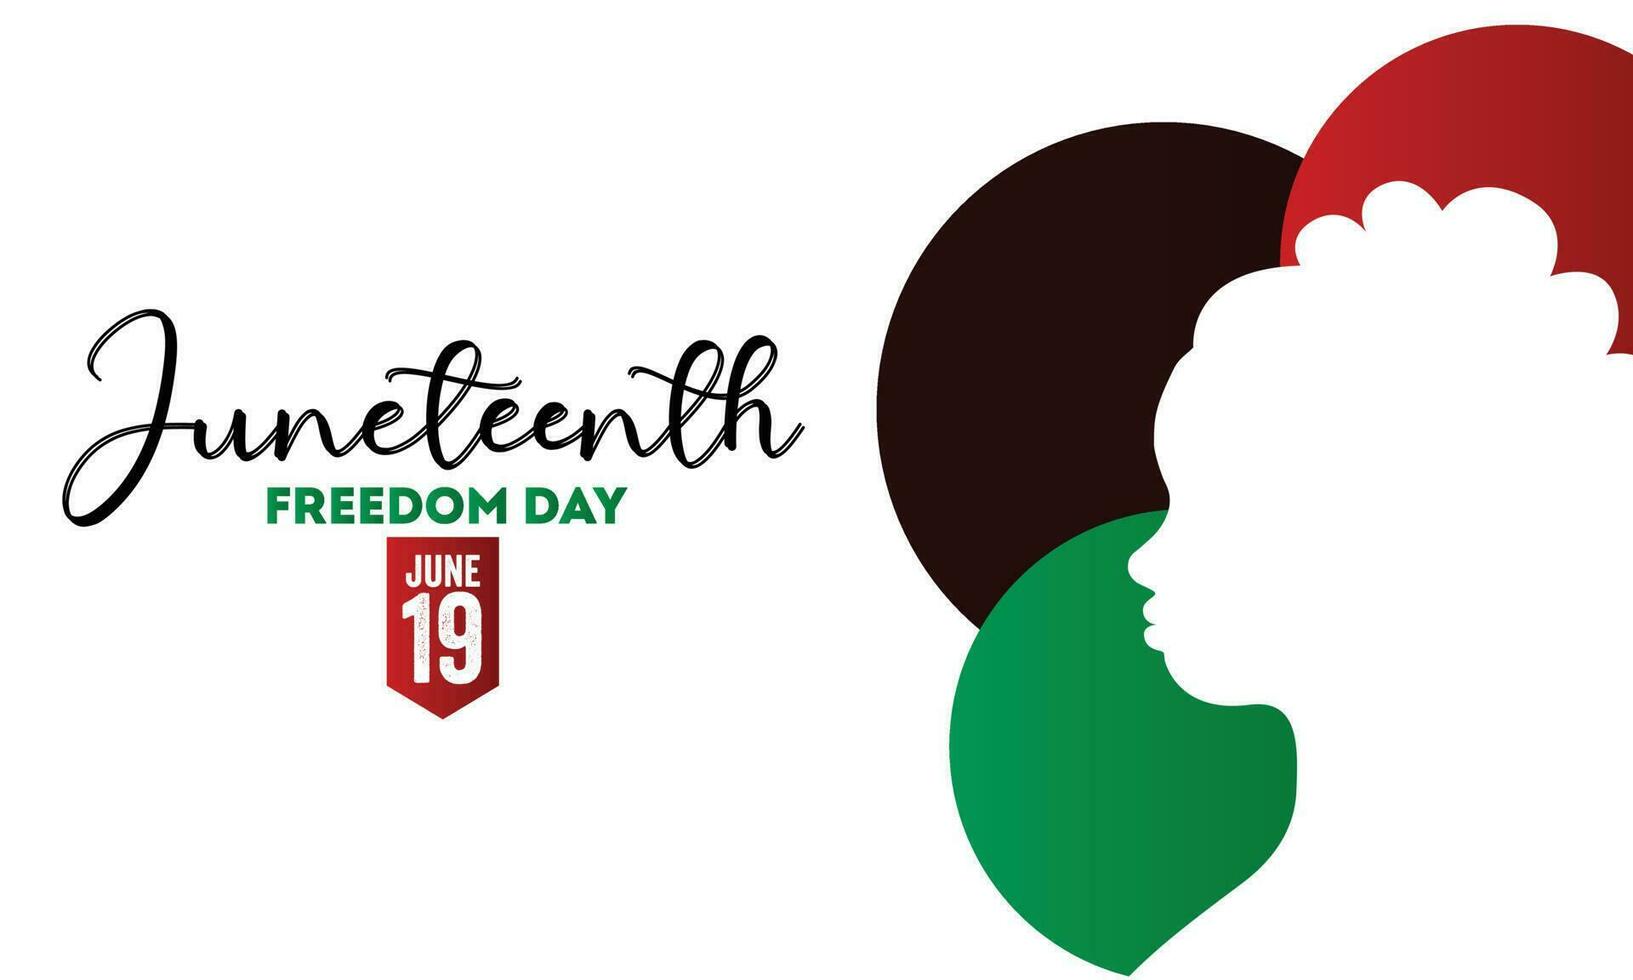 Juneteenth day, Celebration freedom, emancipation day in 19 june, African-American history and heritage. vector